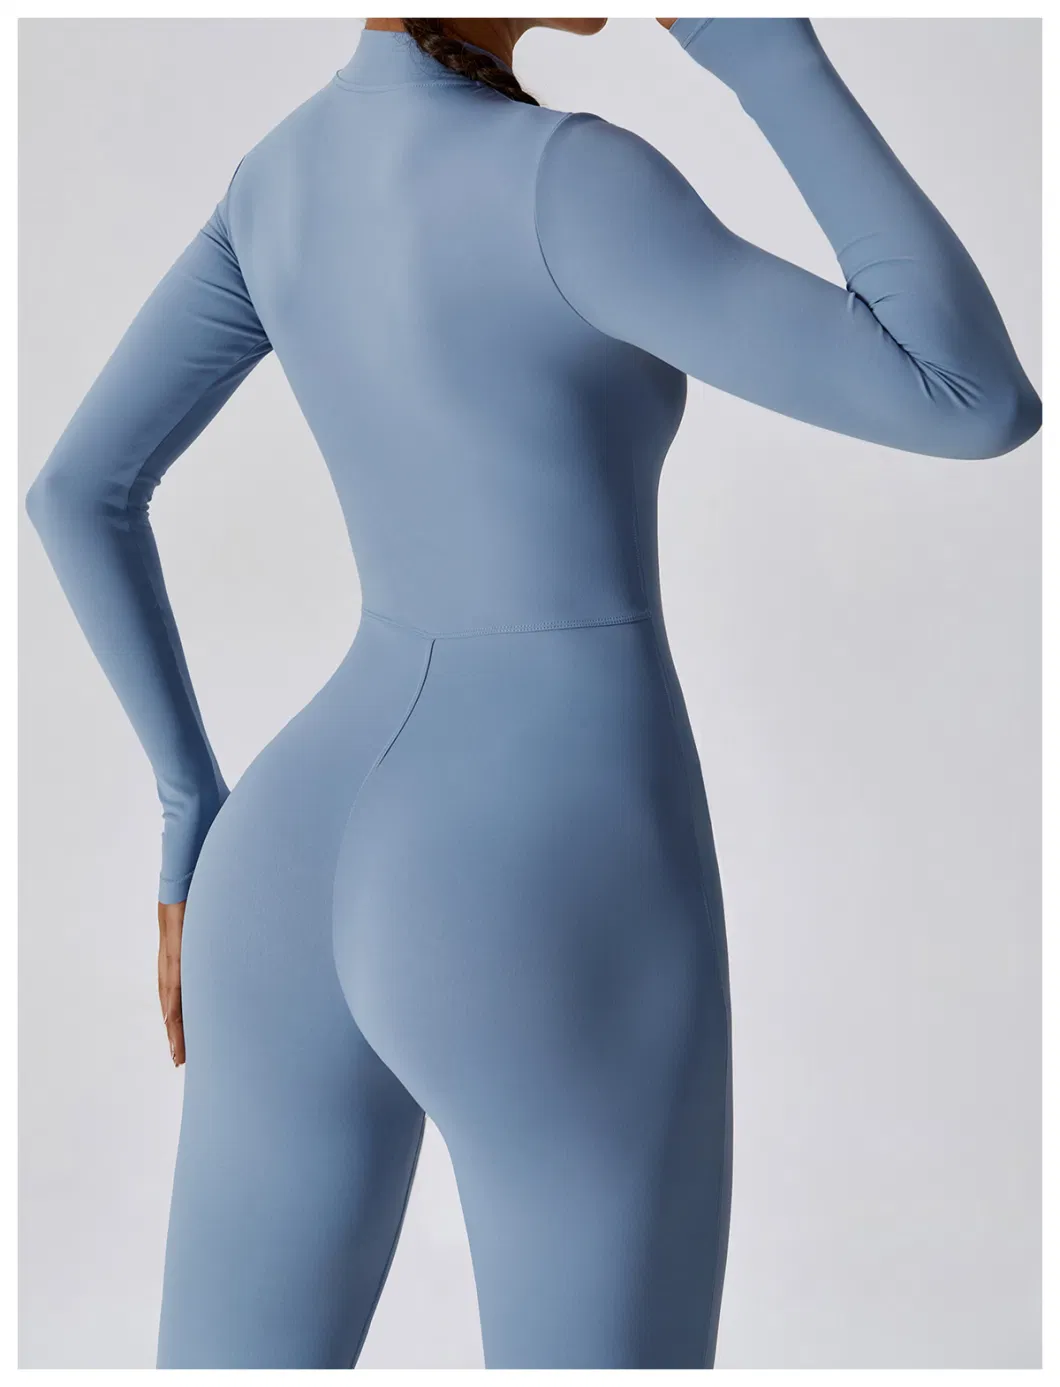 Factory Wholesale Long Sleeve Zip up Full Length Romper Playsuit Bodycon Unitard One Piece Yoga Workout Fitness Jumpsuit